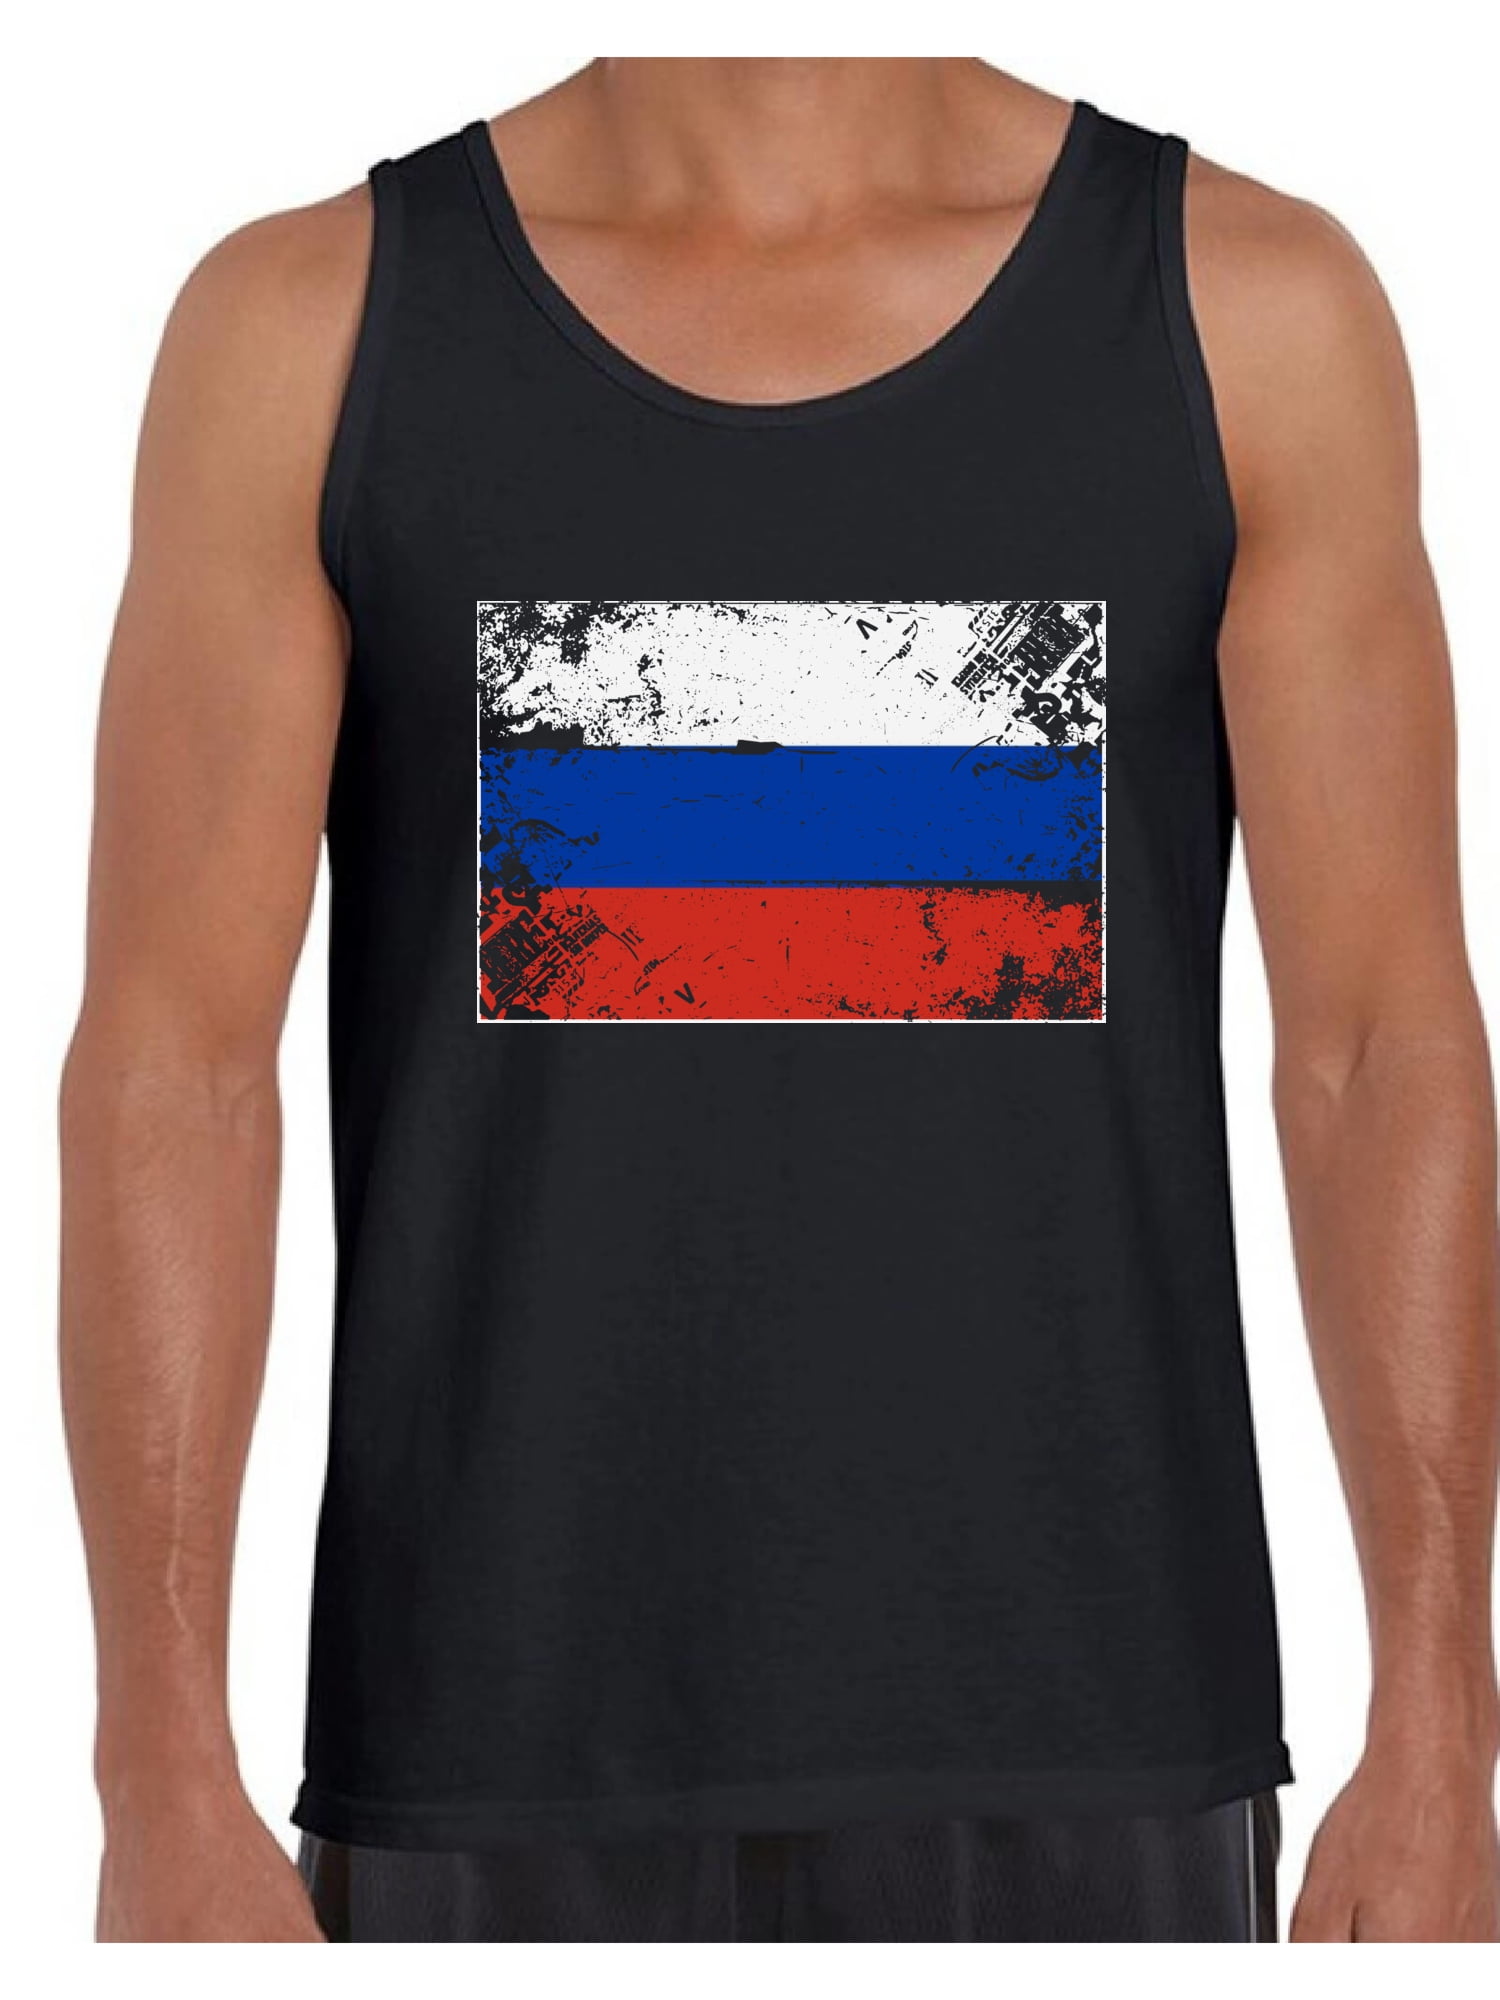 Awkward Styles - Awkward Styles Russia Flag Tank Top for Men Russian ...